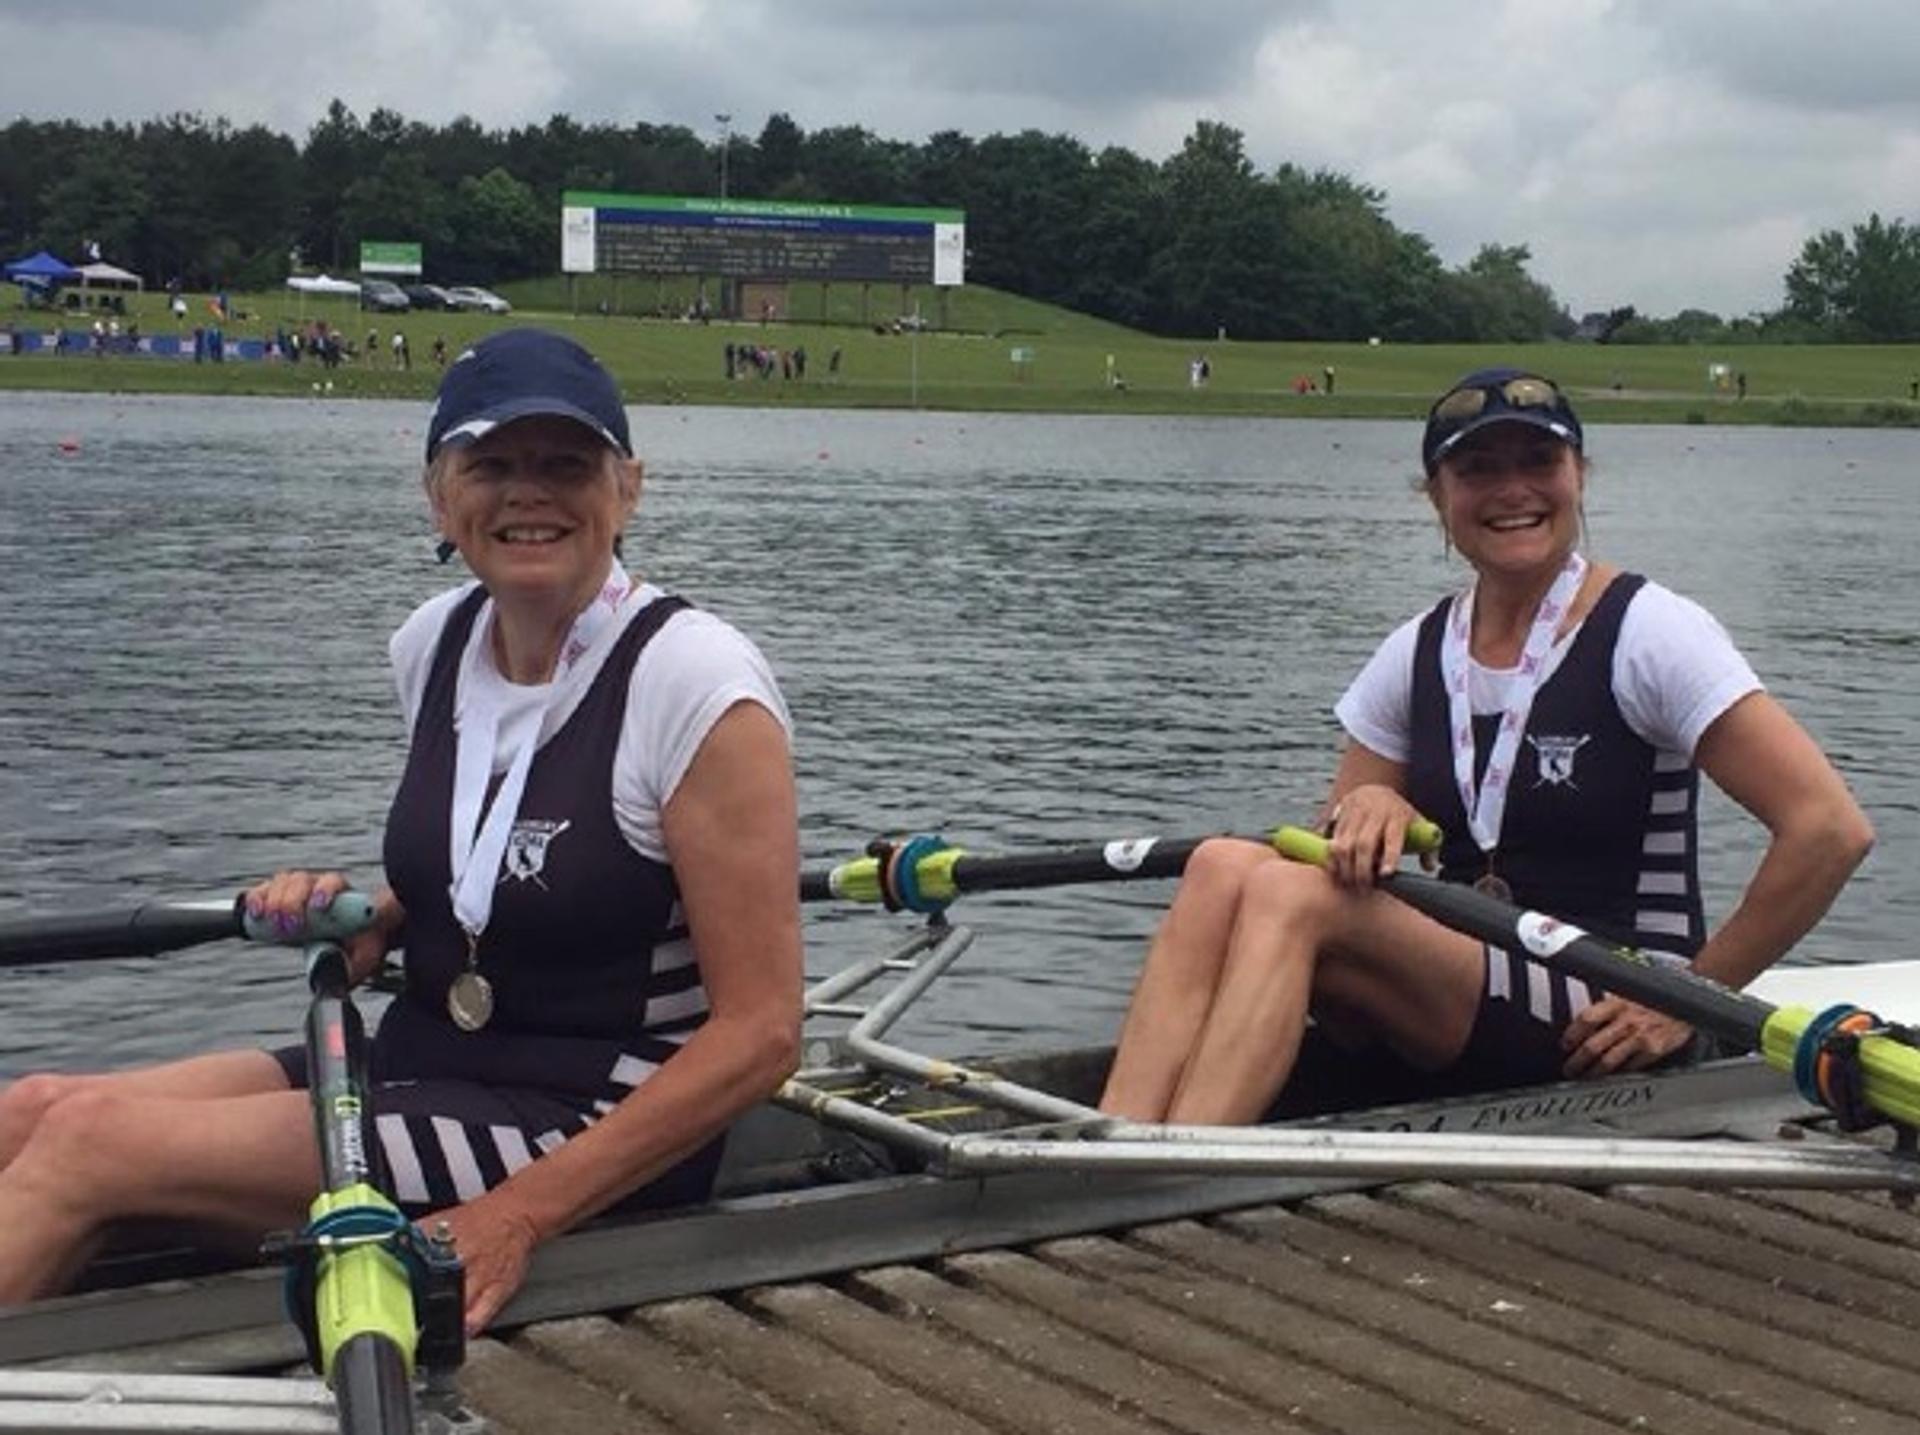 Our smiling silver medalists, wearing medals but still in their seats (blades in hand) at the landing stage at the Massive Expanse of Water in Nottingham.